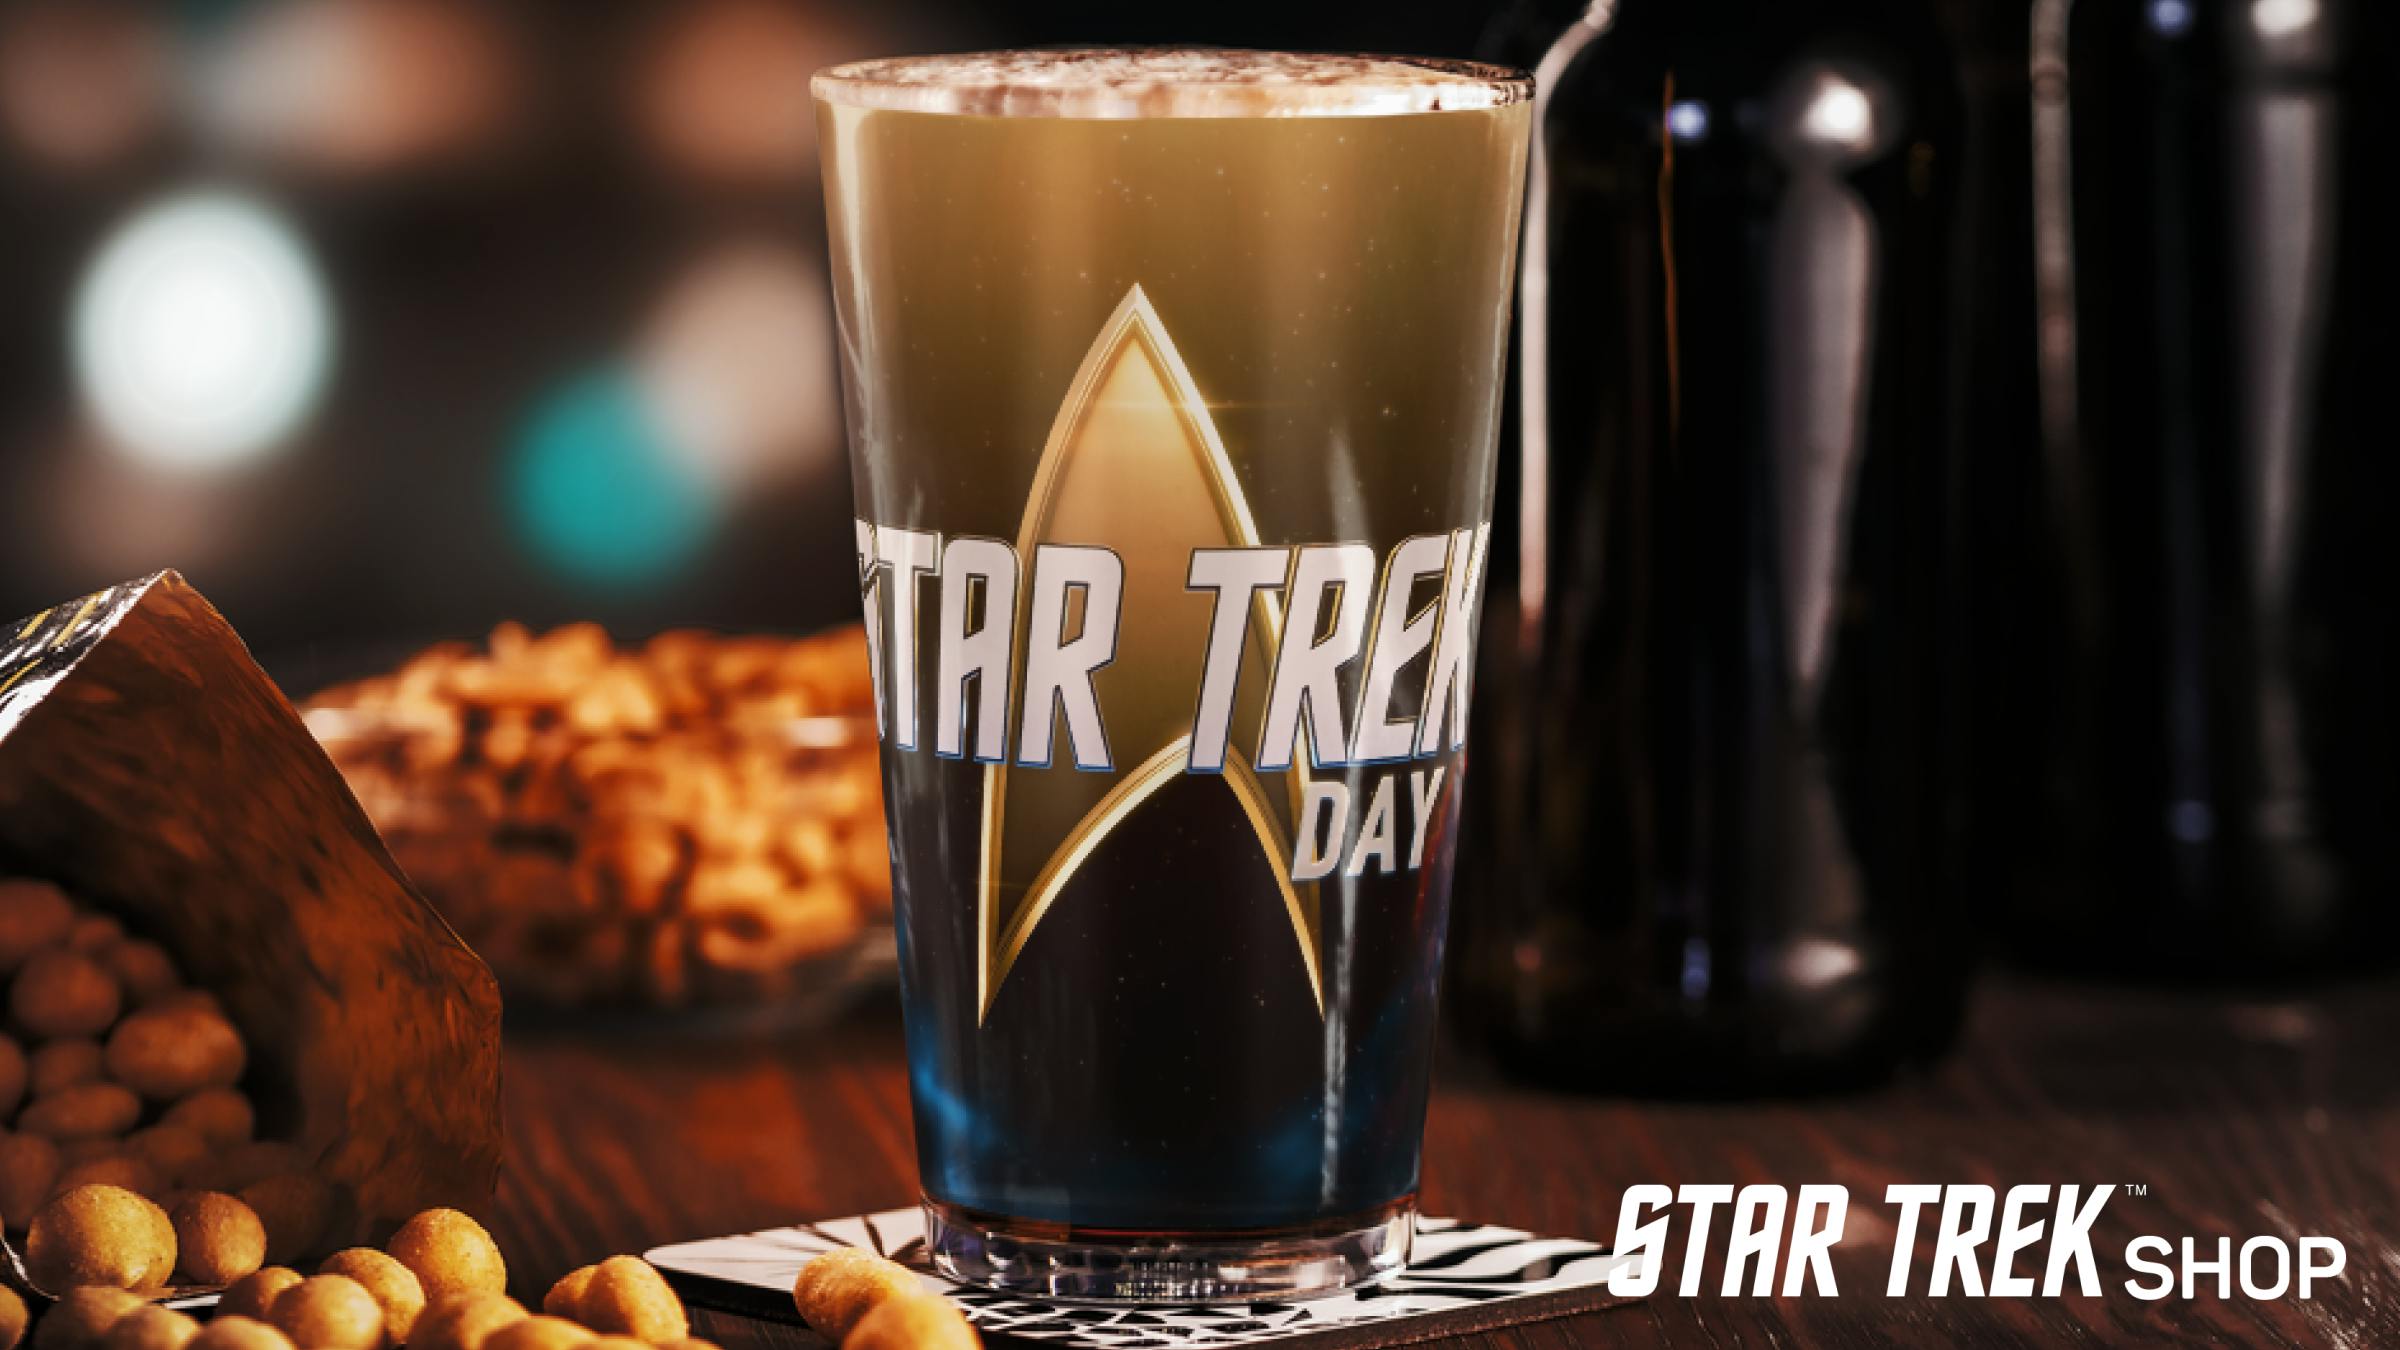 Star Trek Day glassware next to snacks on a table from the Star Trek Shop